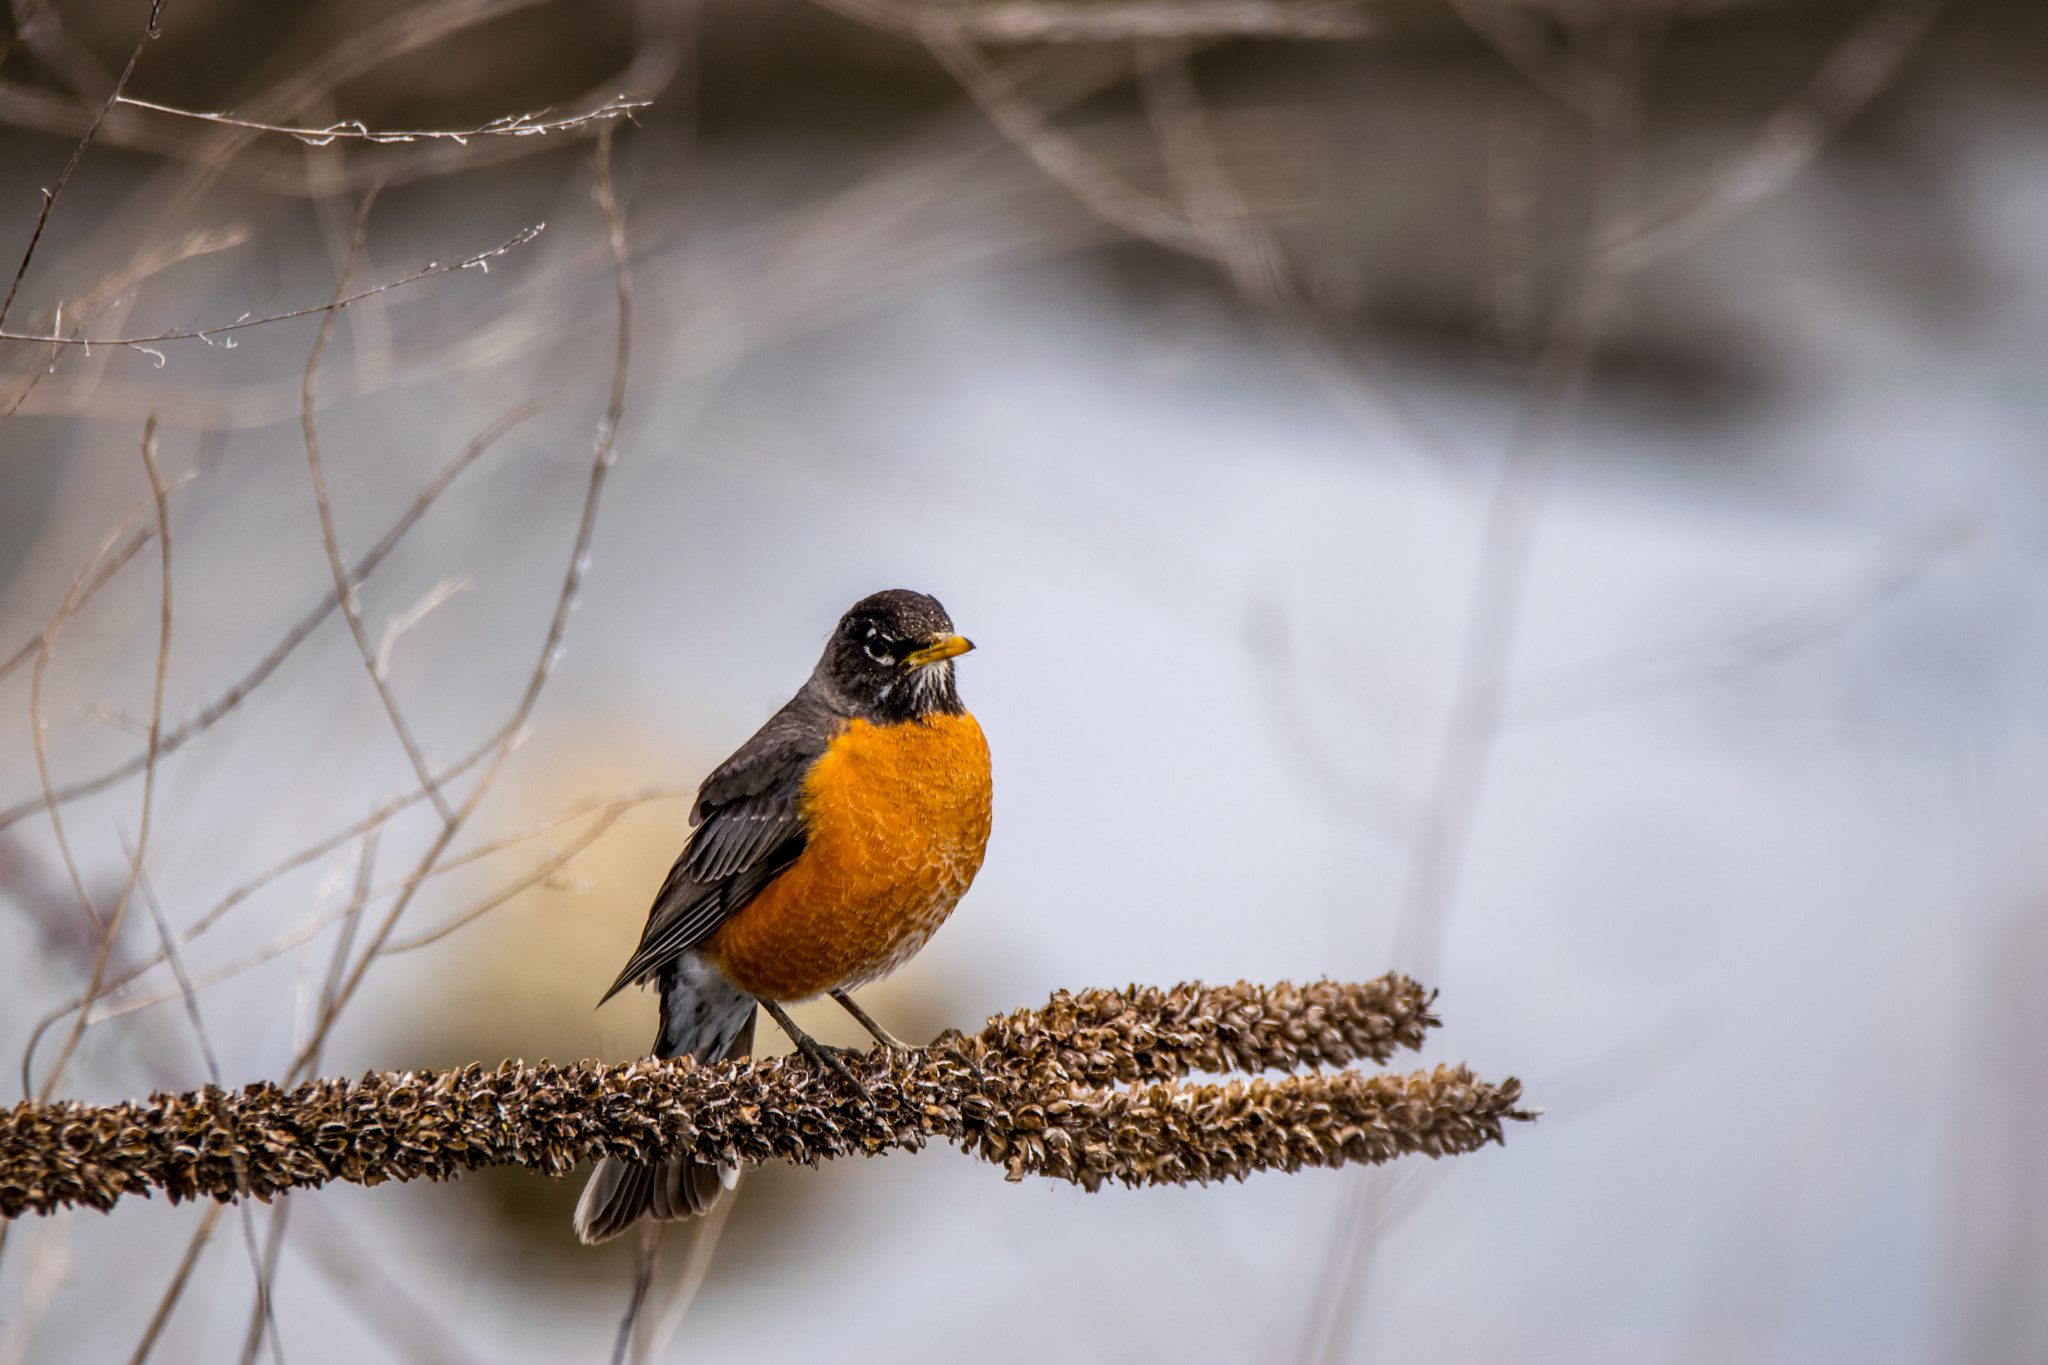 Nikon D5300 + Sigma 150-600mm F5-6.3 DG OS HSM | C sample photo. Robin... waiting for spring photography